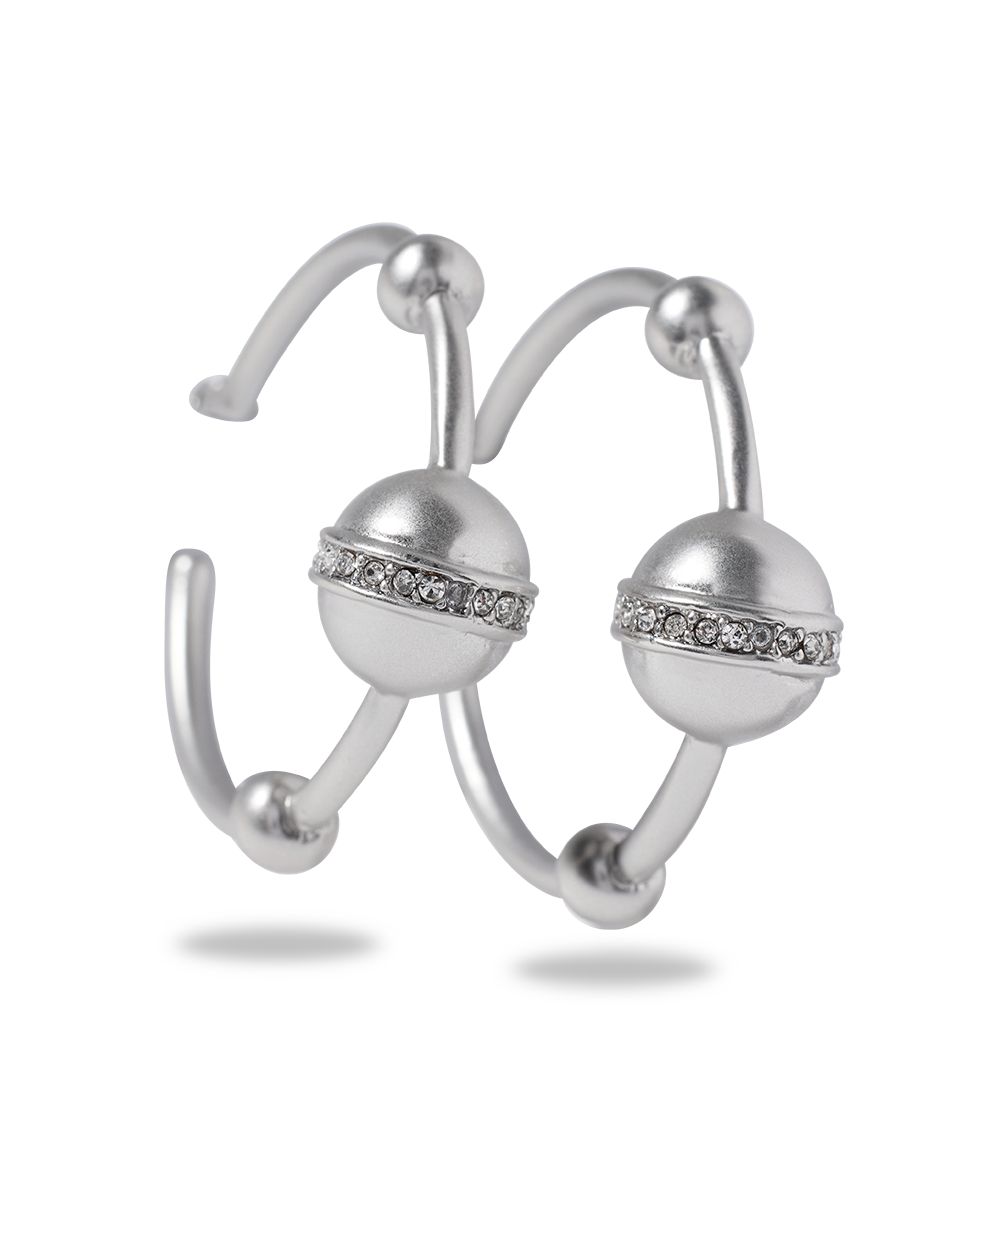 Silver Sphere Hoop Earrings click to view larger image.